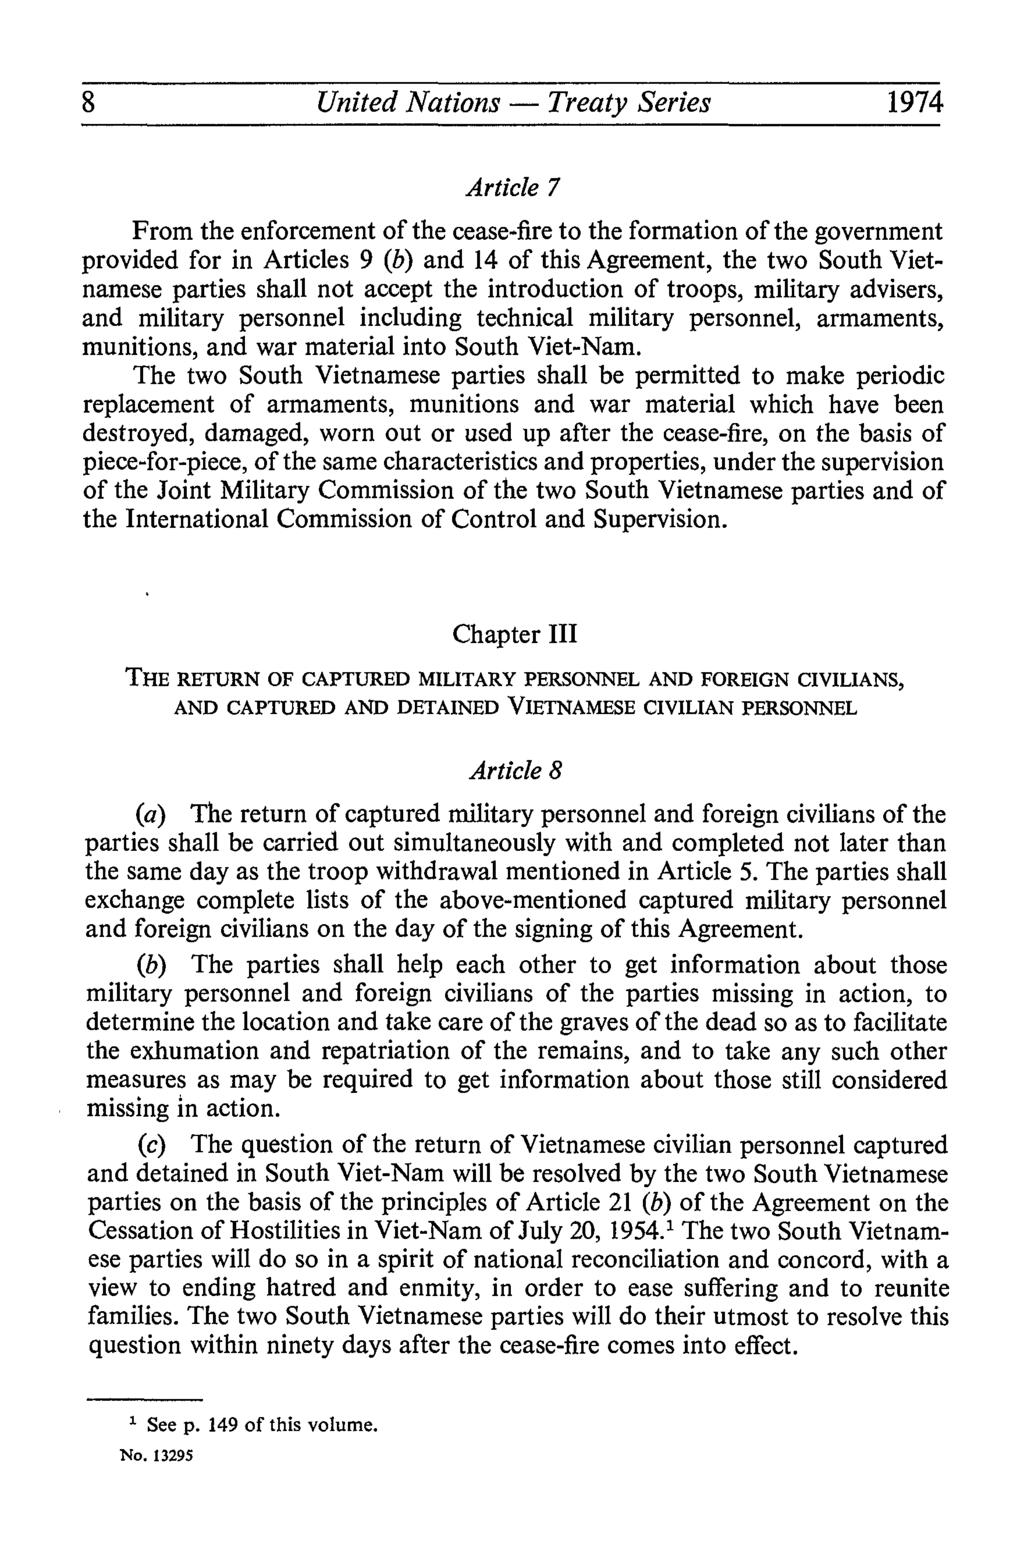 United Nations Treaty Series 1974 Article 7 From the enforcement of the cease-fire to the formation of the government provided for in Articles 9 (b) and 14 of this Agreement, the two South Viet